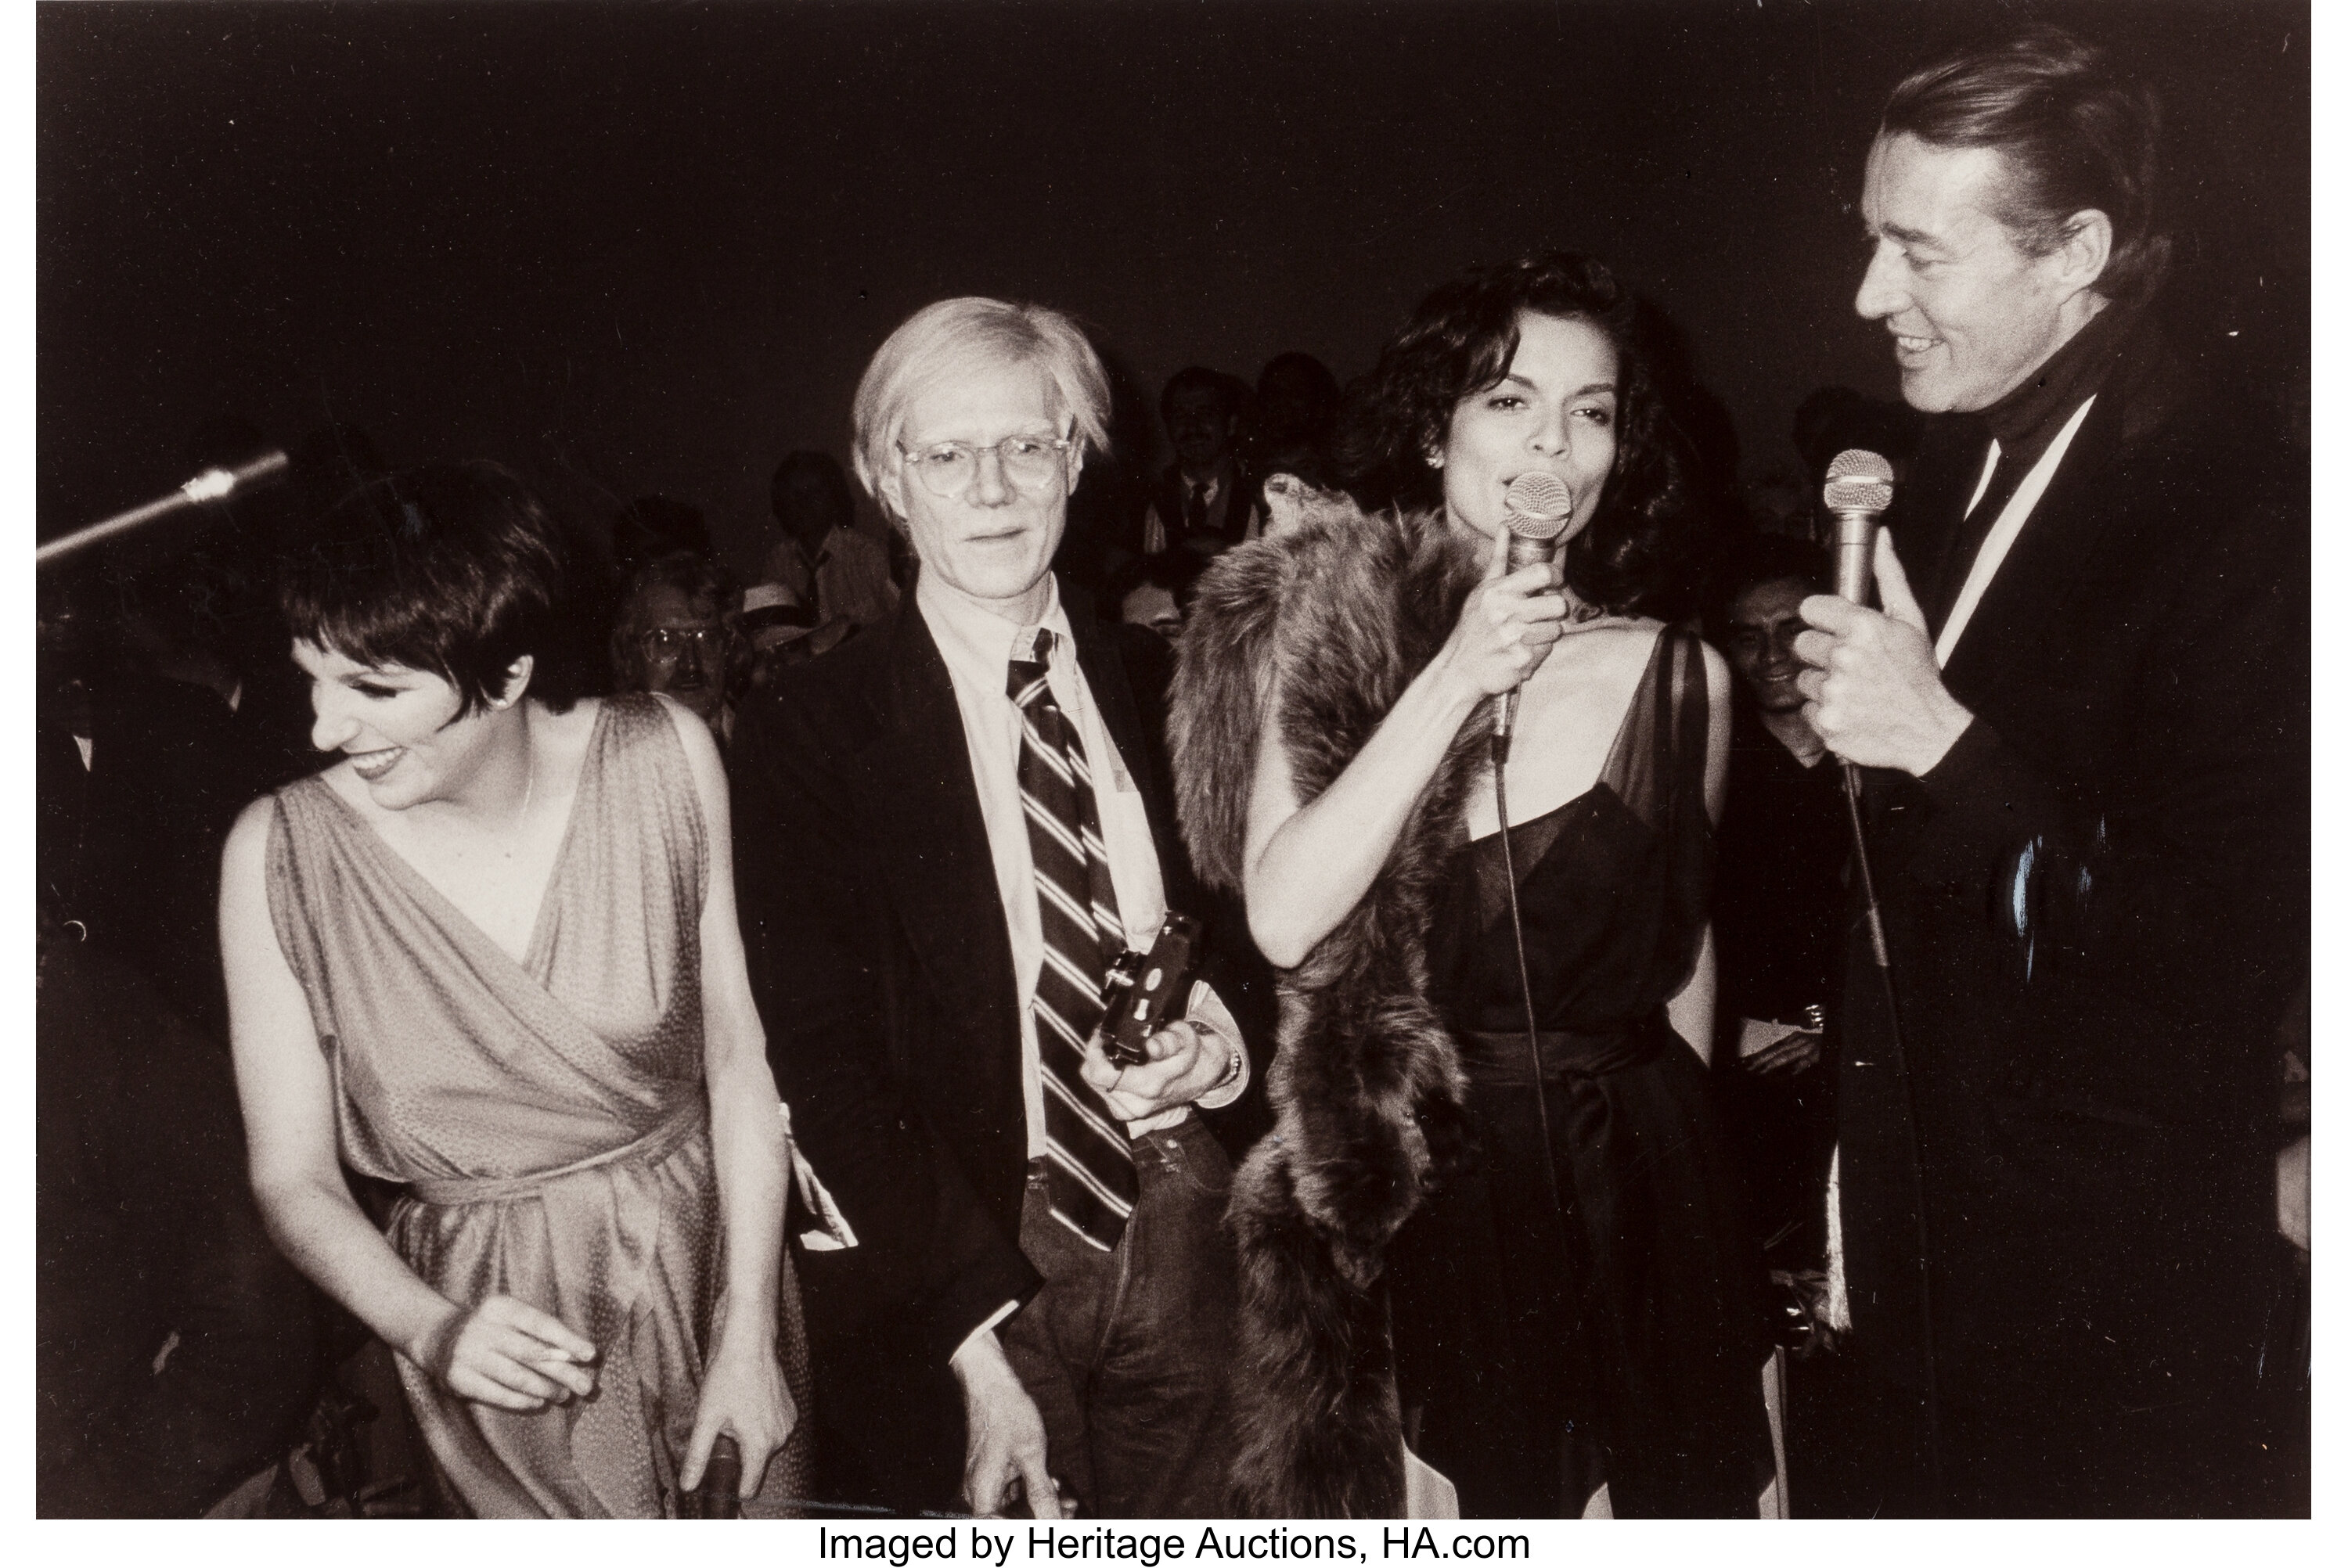 Christopher Makos (American, 1948). The Gang of Four at Studio 54 | Lot  #96033 | Heritage Auctions